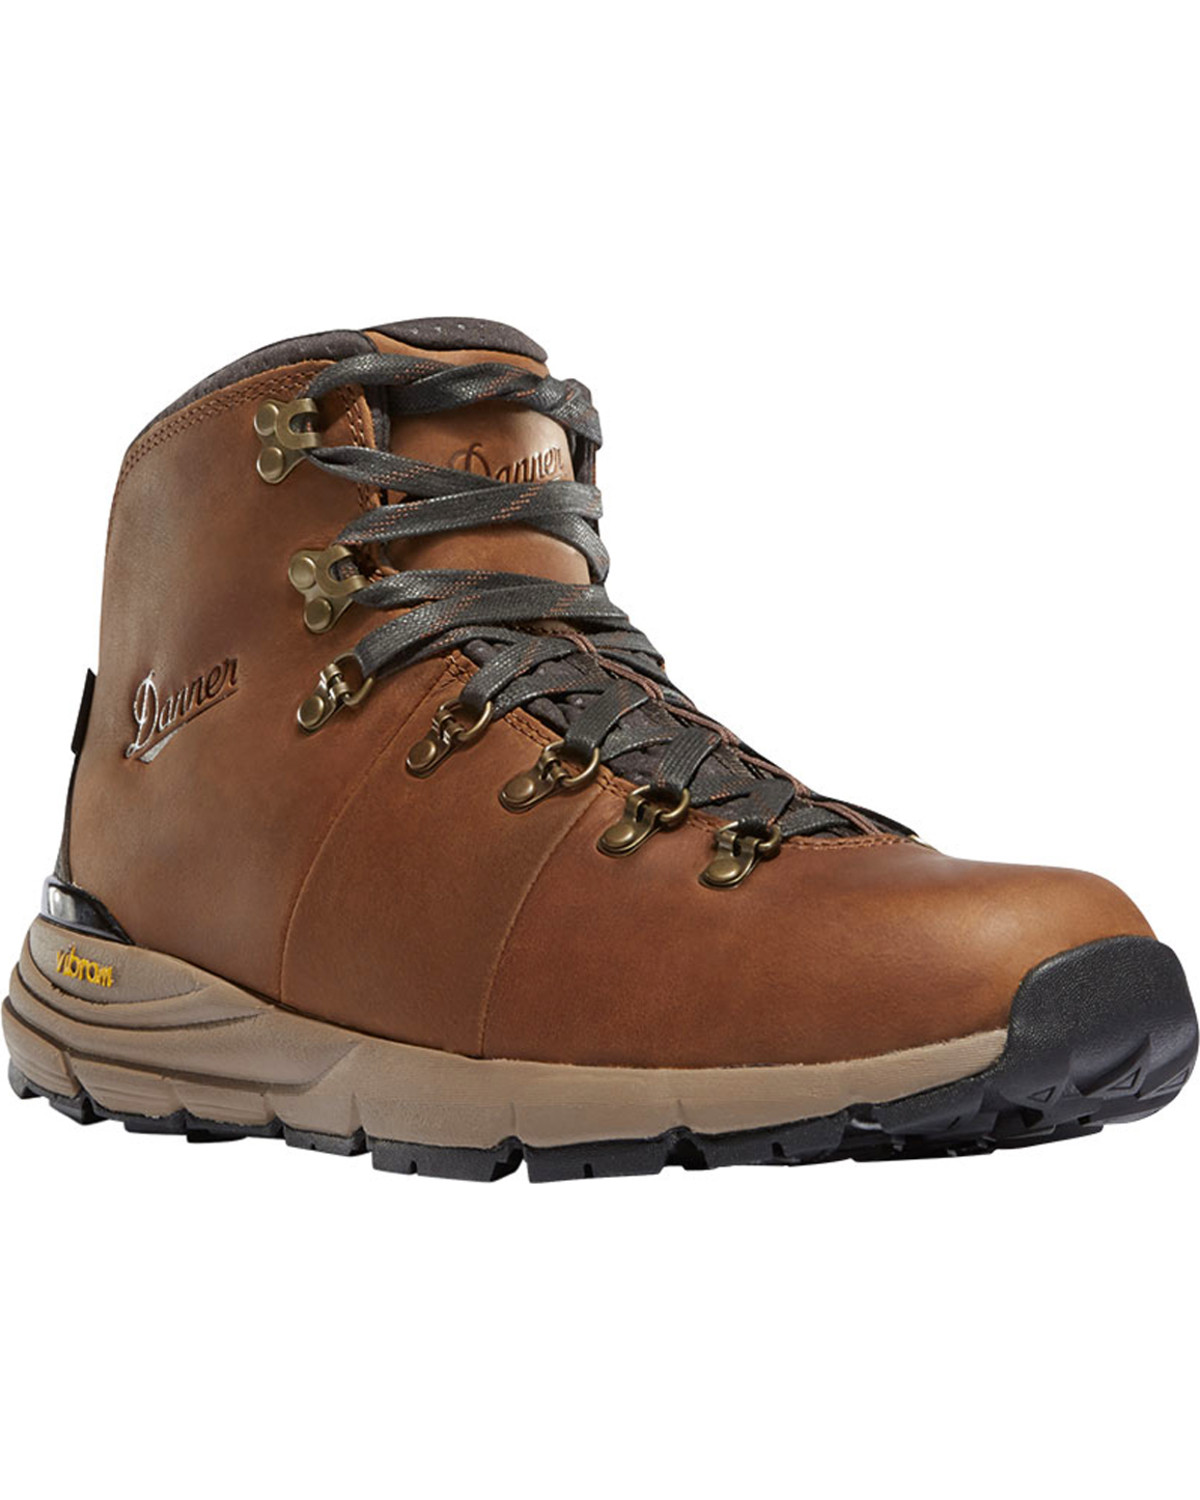 Danner Men's Mountain 600 Hiking Boots - Round Toe